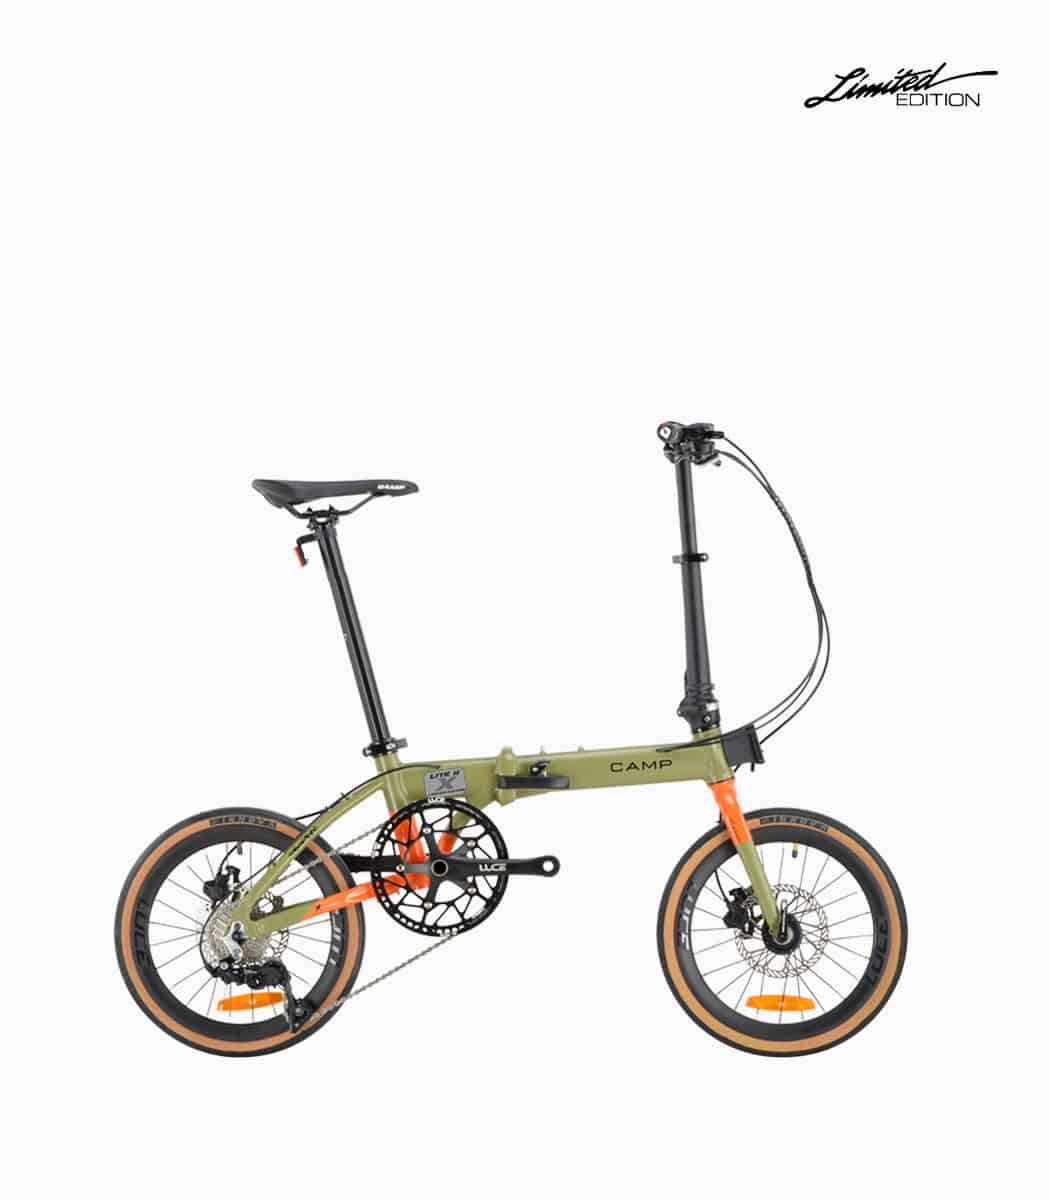 CAMP Lite 11X (GREEN-ORANGE) foldable bicycle right